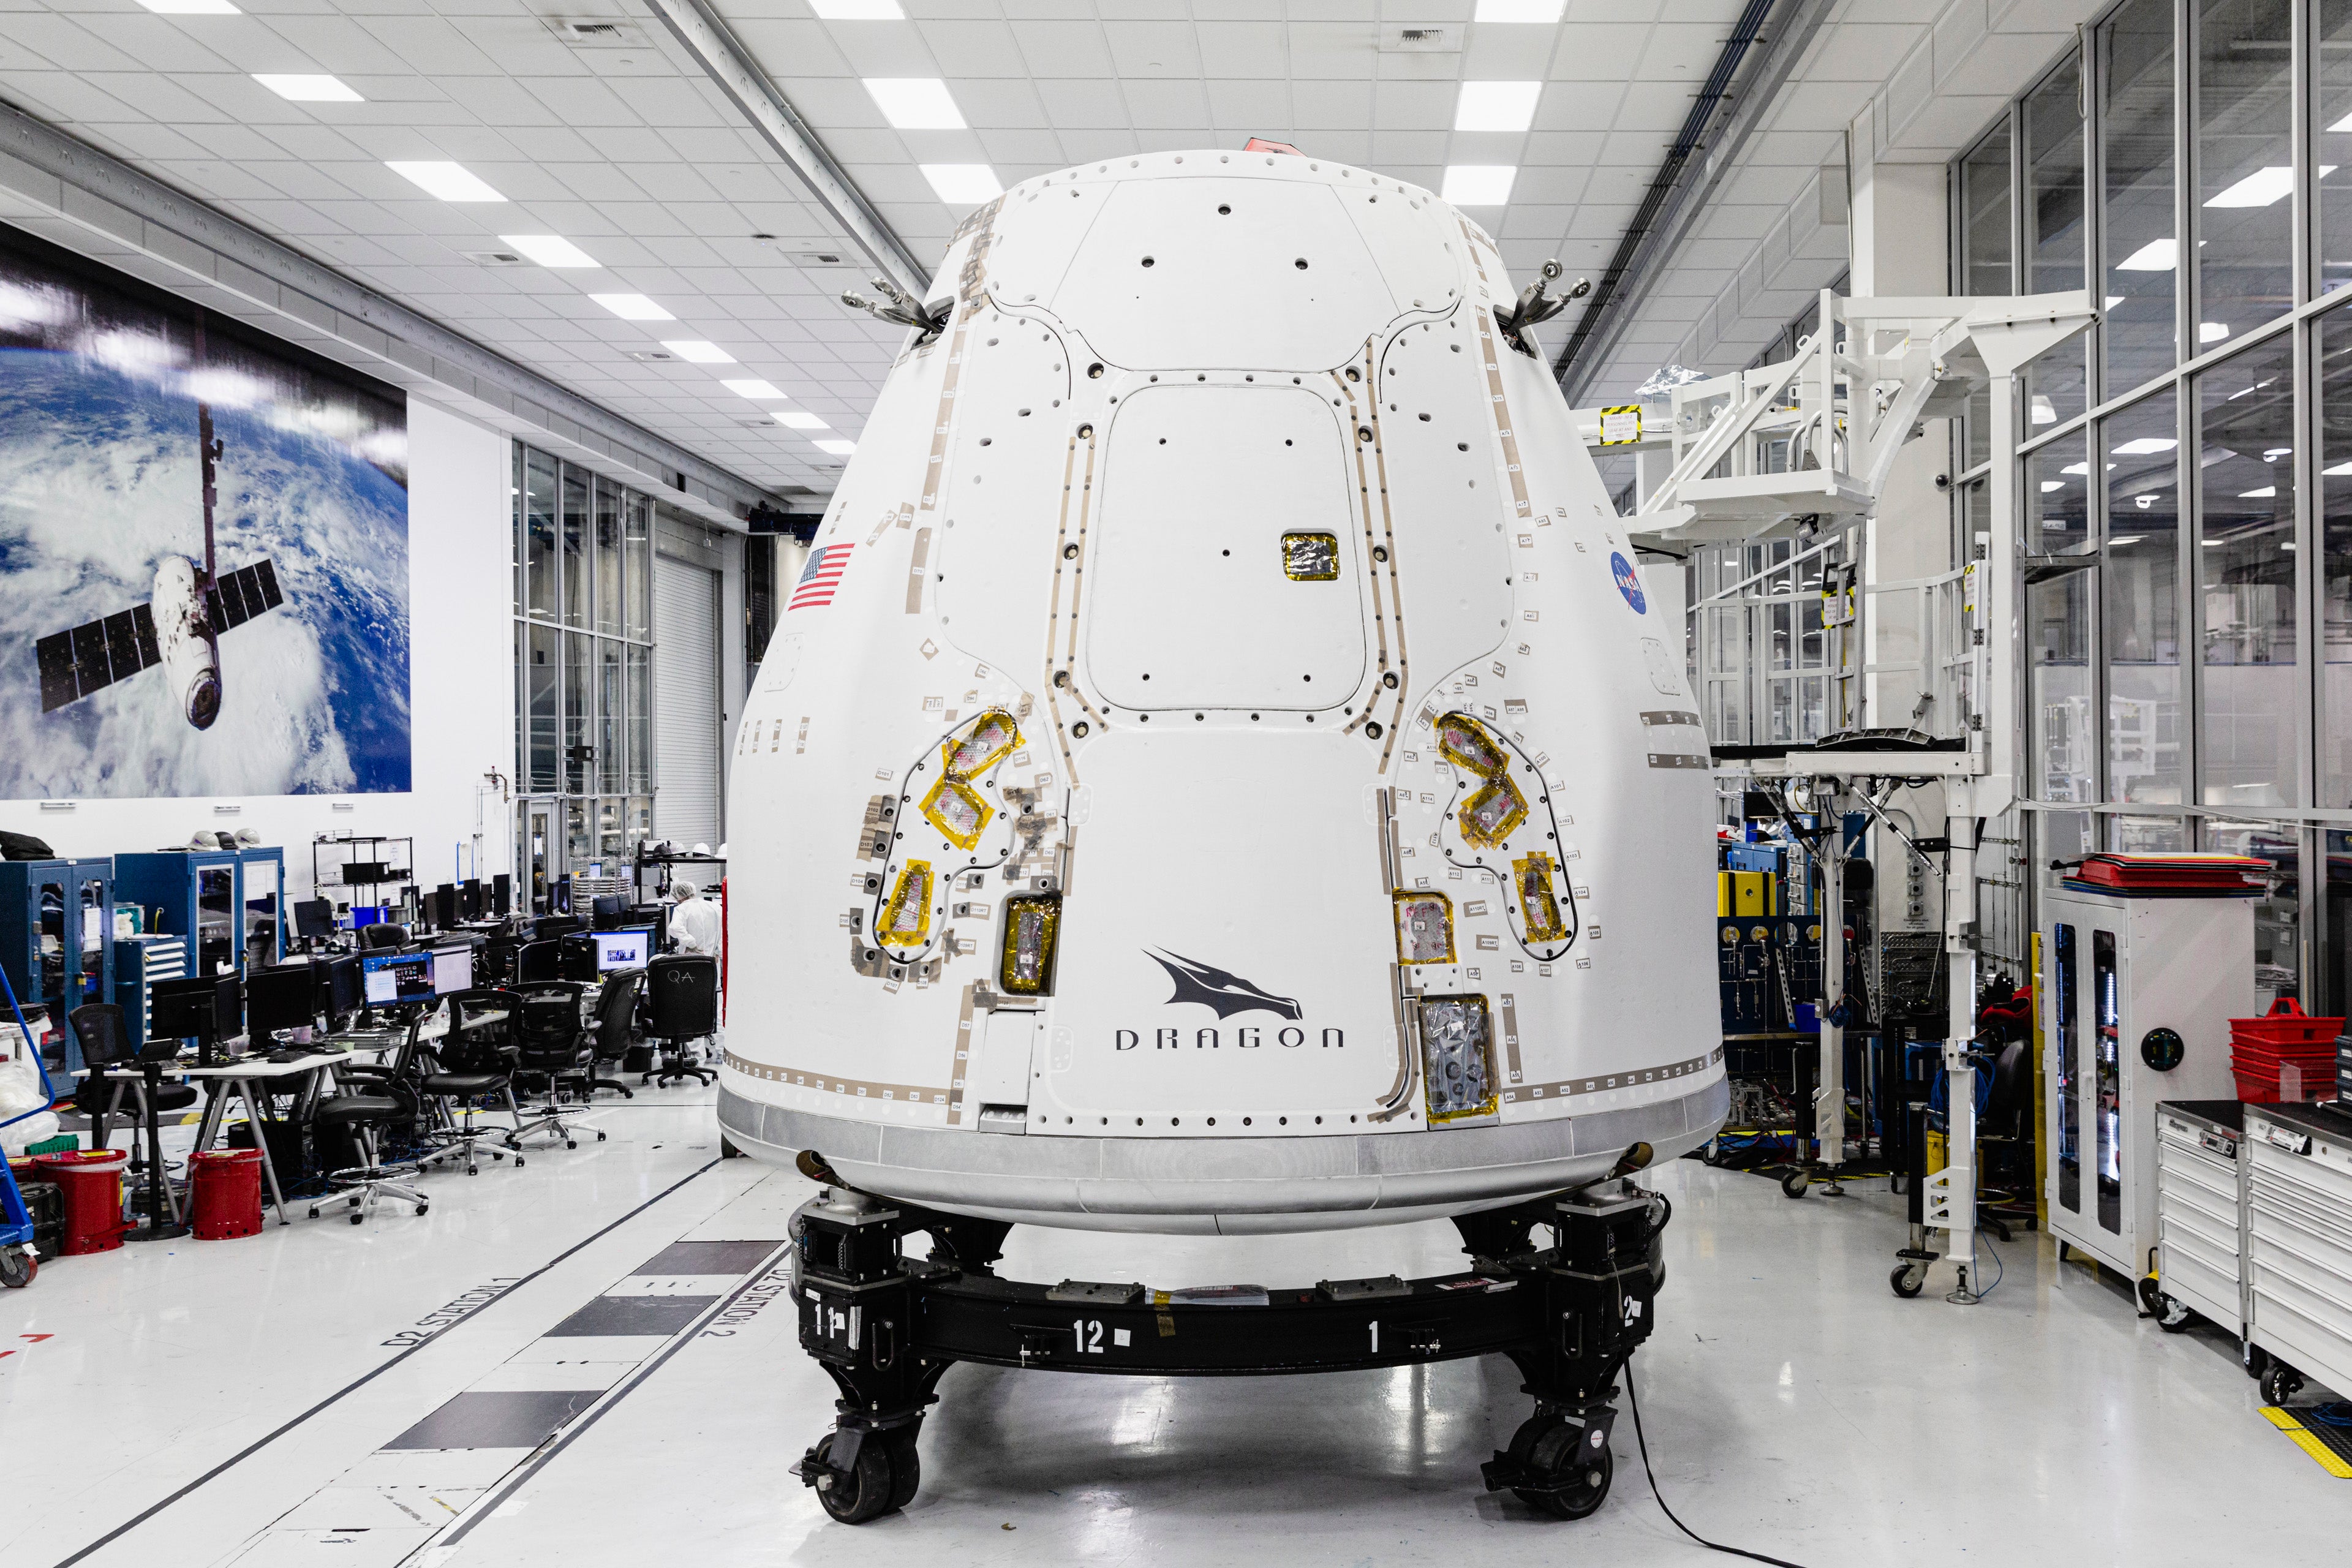 SpaceX is preparing to launch cargo aboard an upgraded Dragon capsule